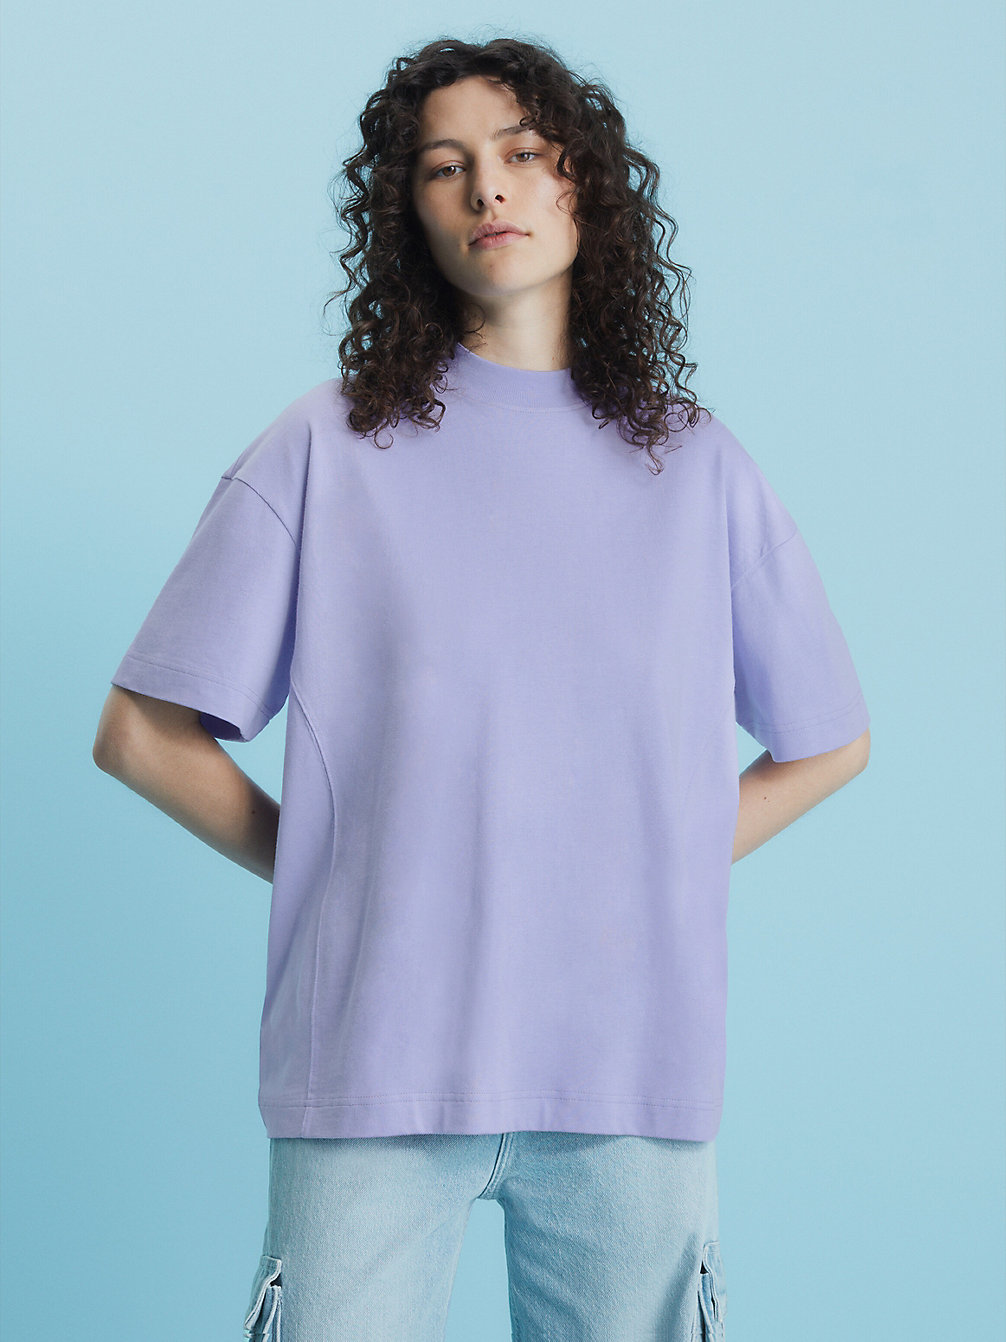 T-Shirt Con Monogramma Dal Taglio Relaxed > HYACINTH HUES > undefined donna > Calvin Klein